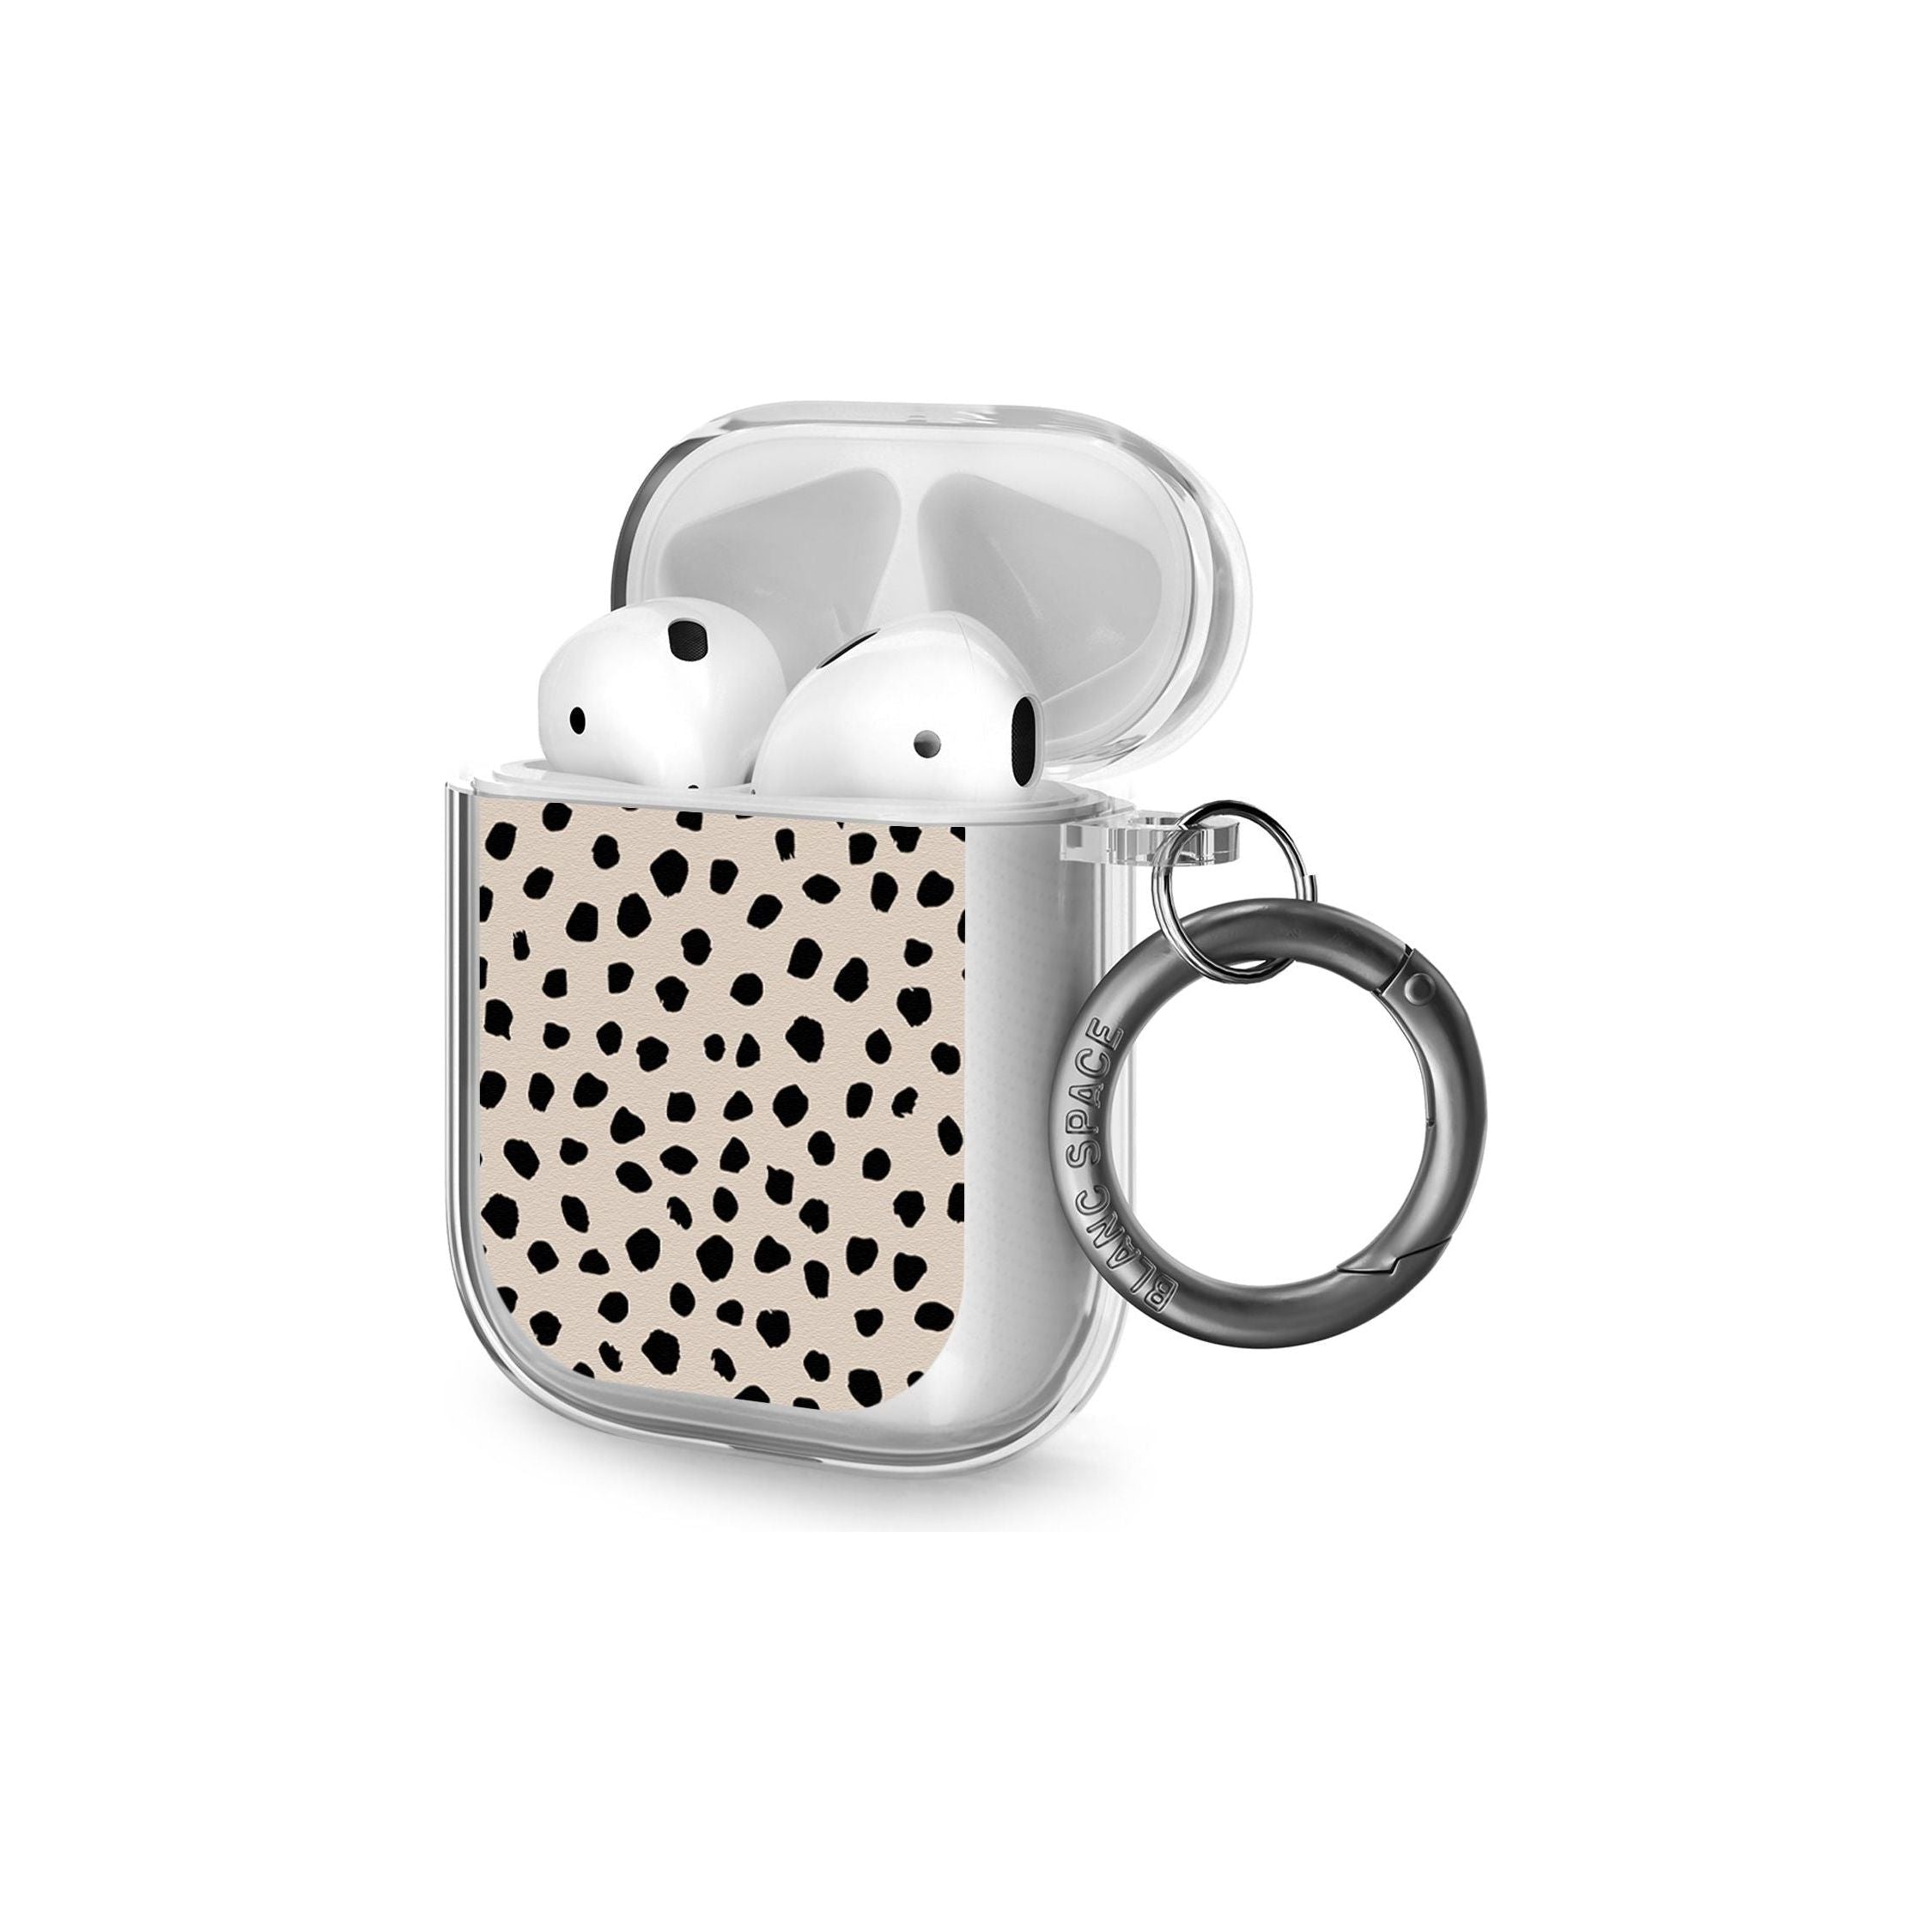 Almond Latte AirPods Case (2nd Generation)